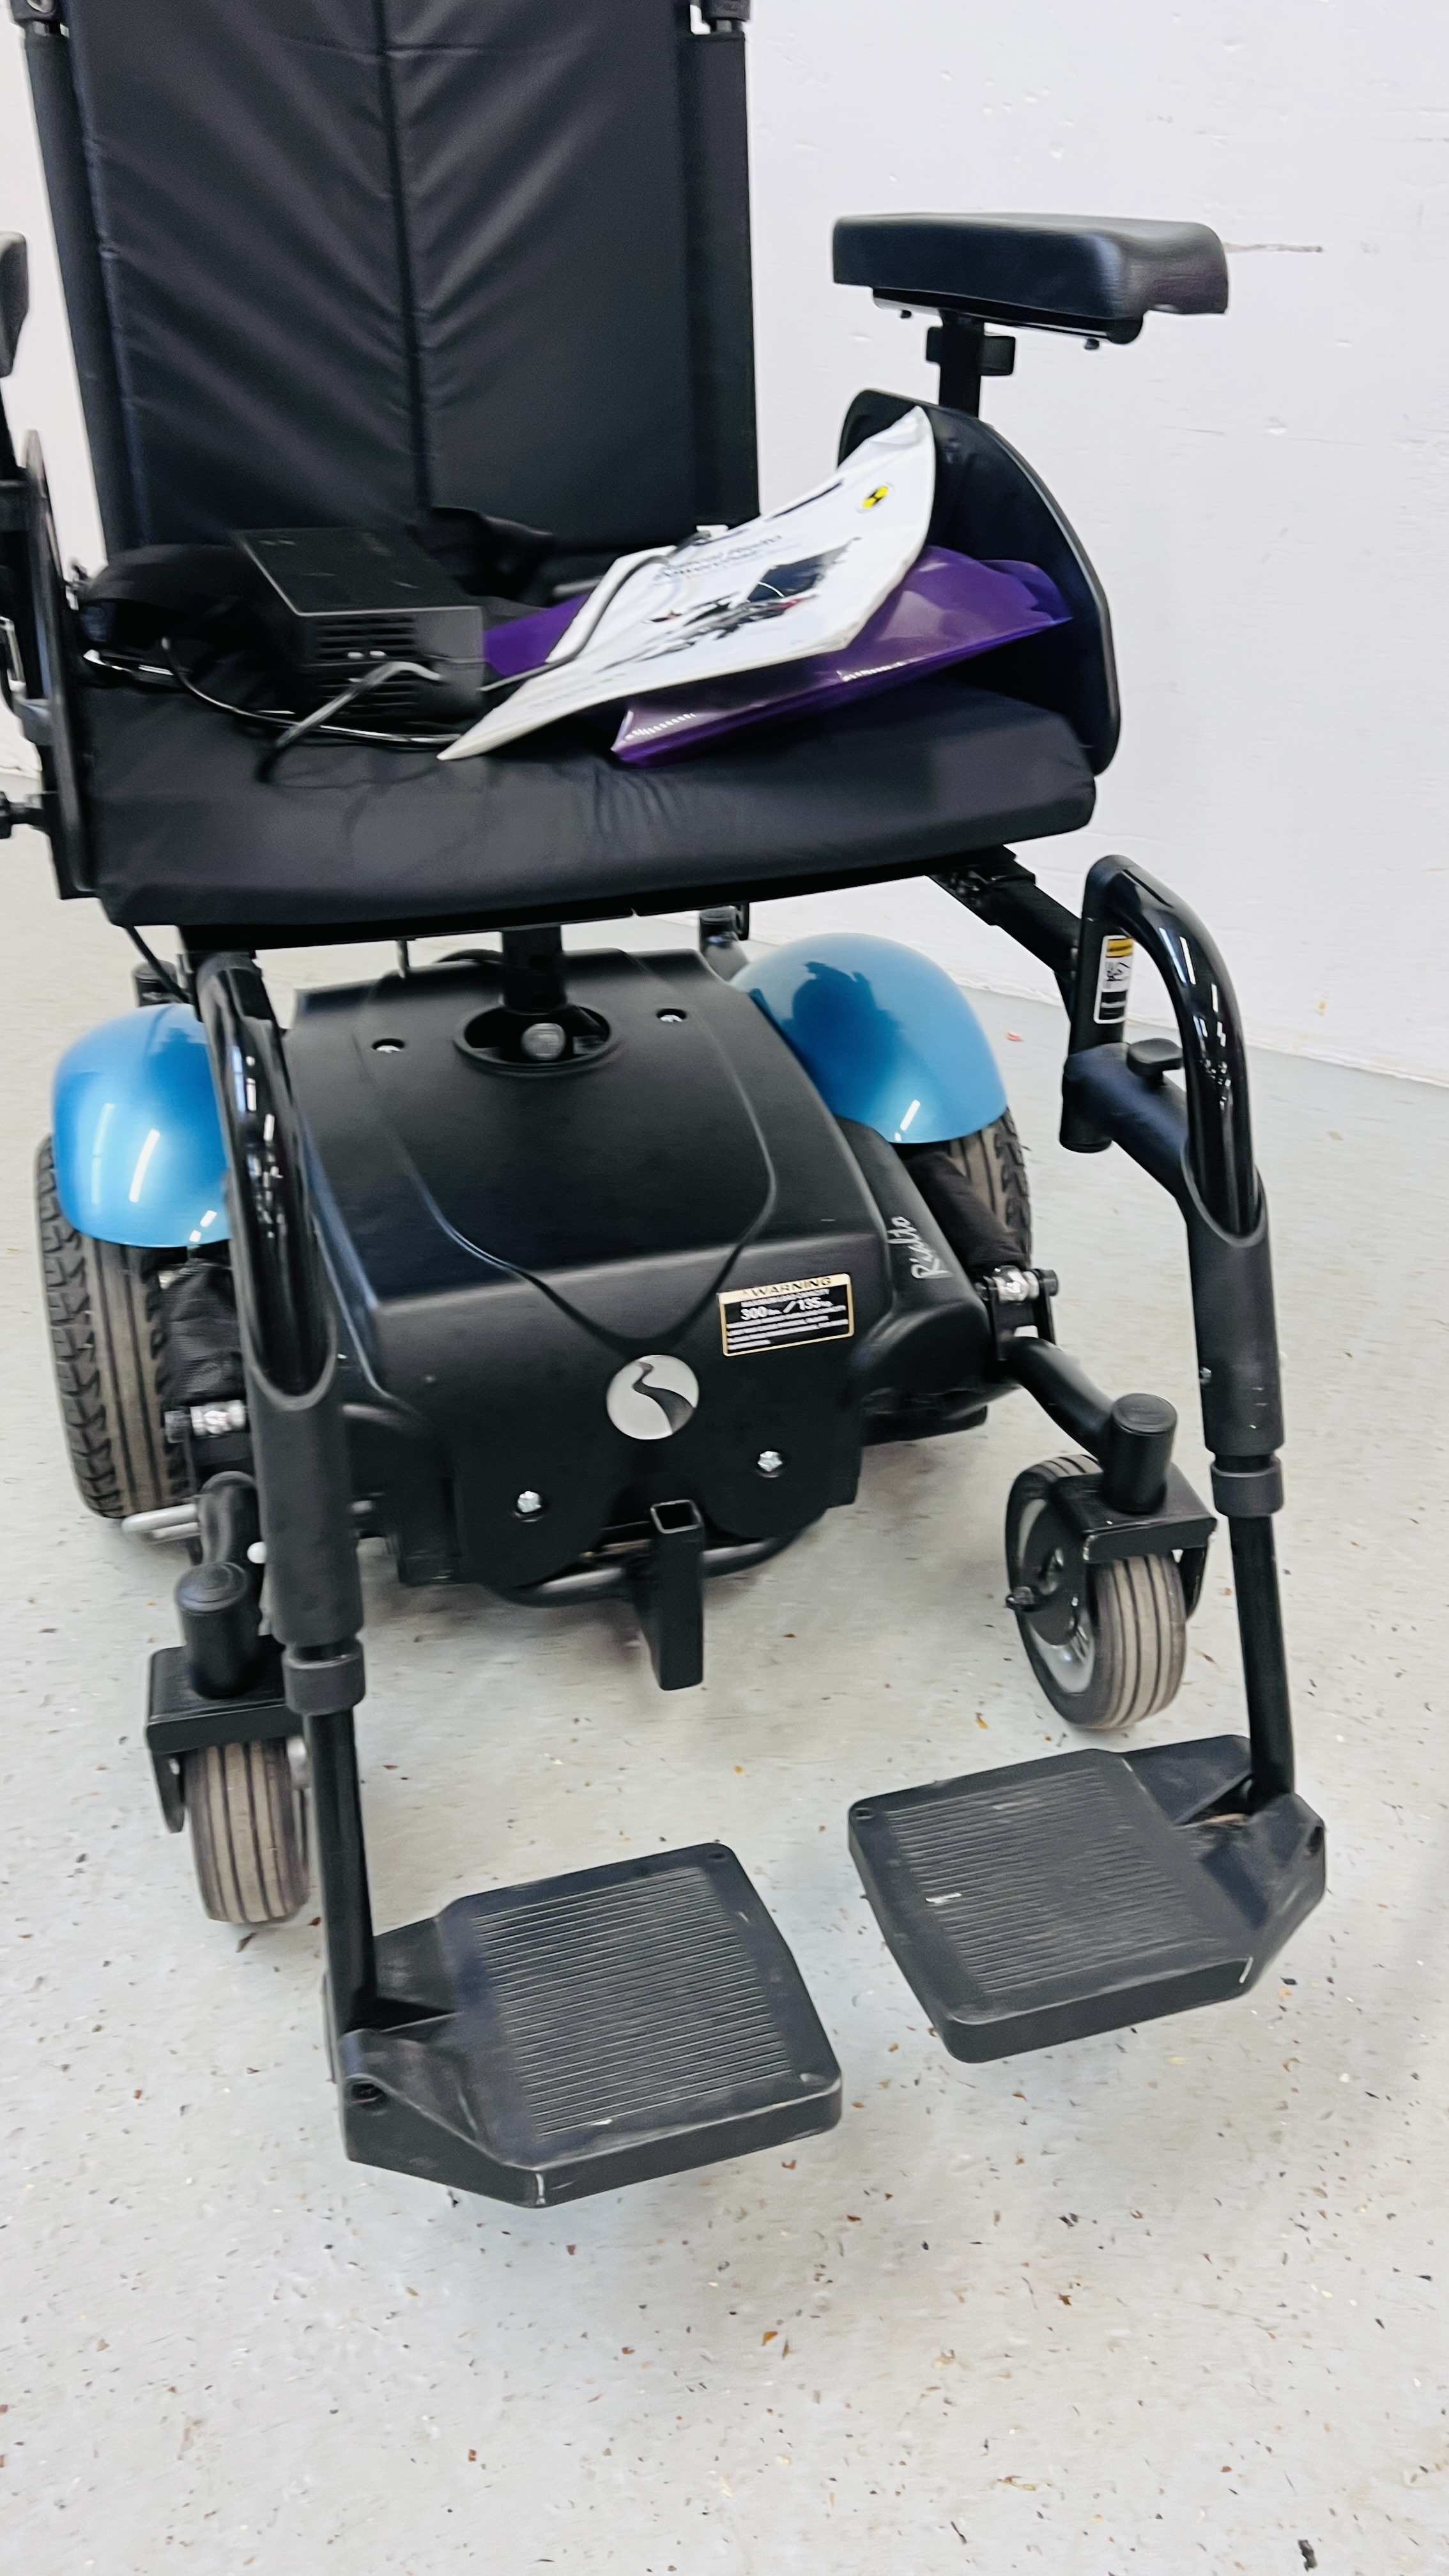 A RASCAL RIALTO POWERCHAIR COMPLETE WITH CHARGER, - Image 5 of 11